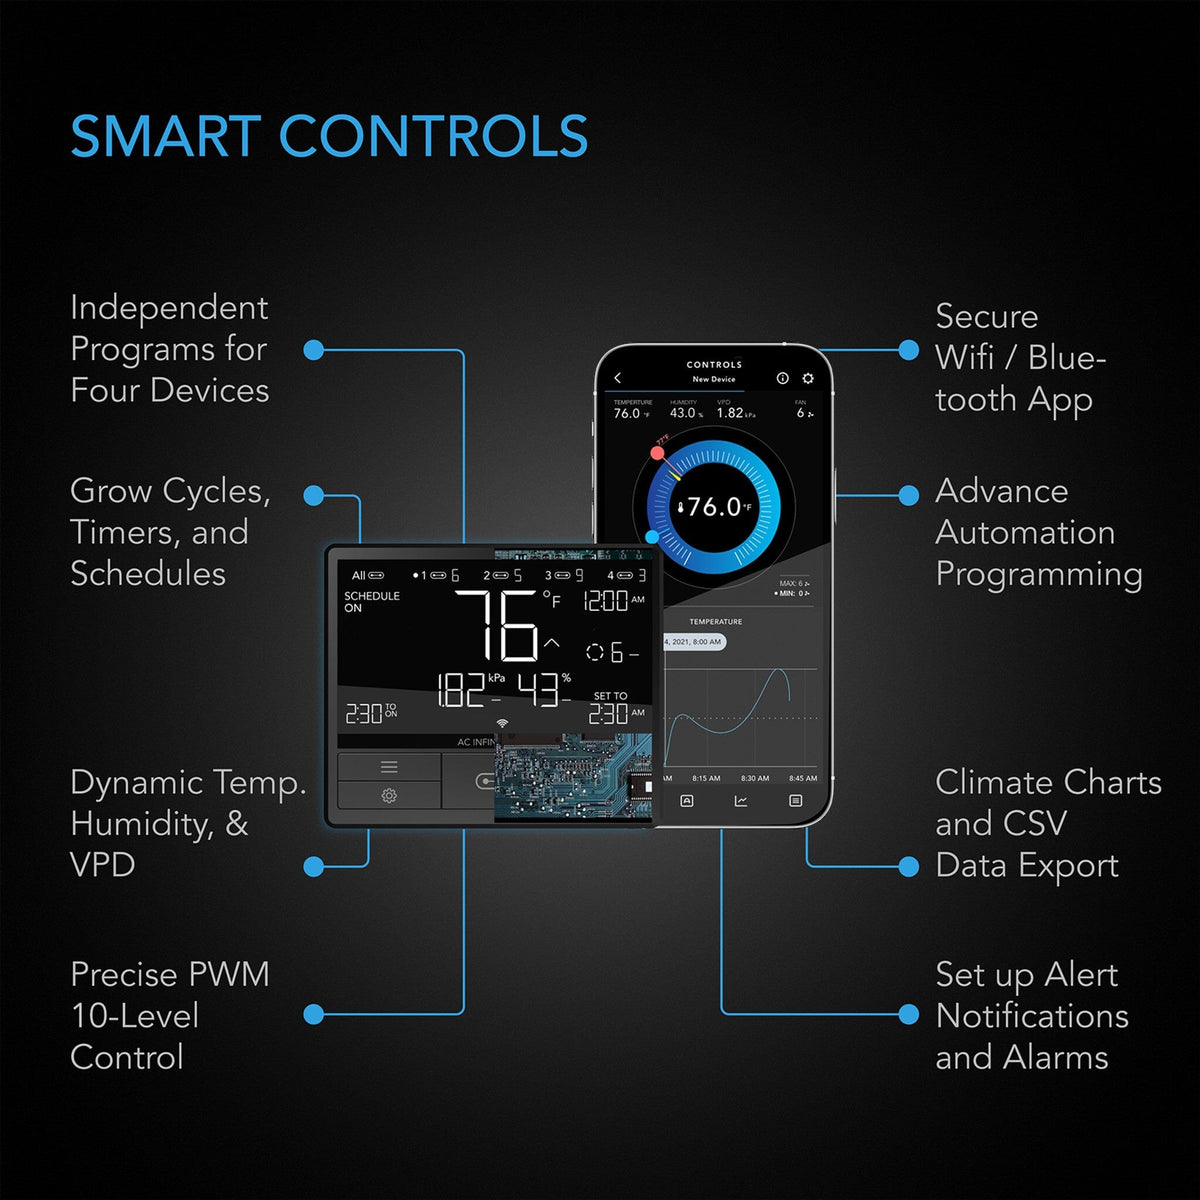 Smart controls with wifi